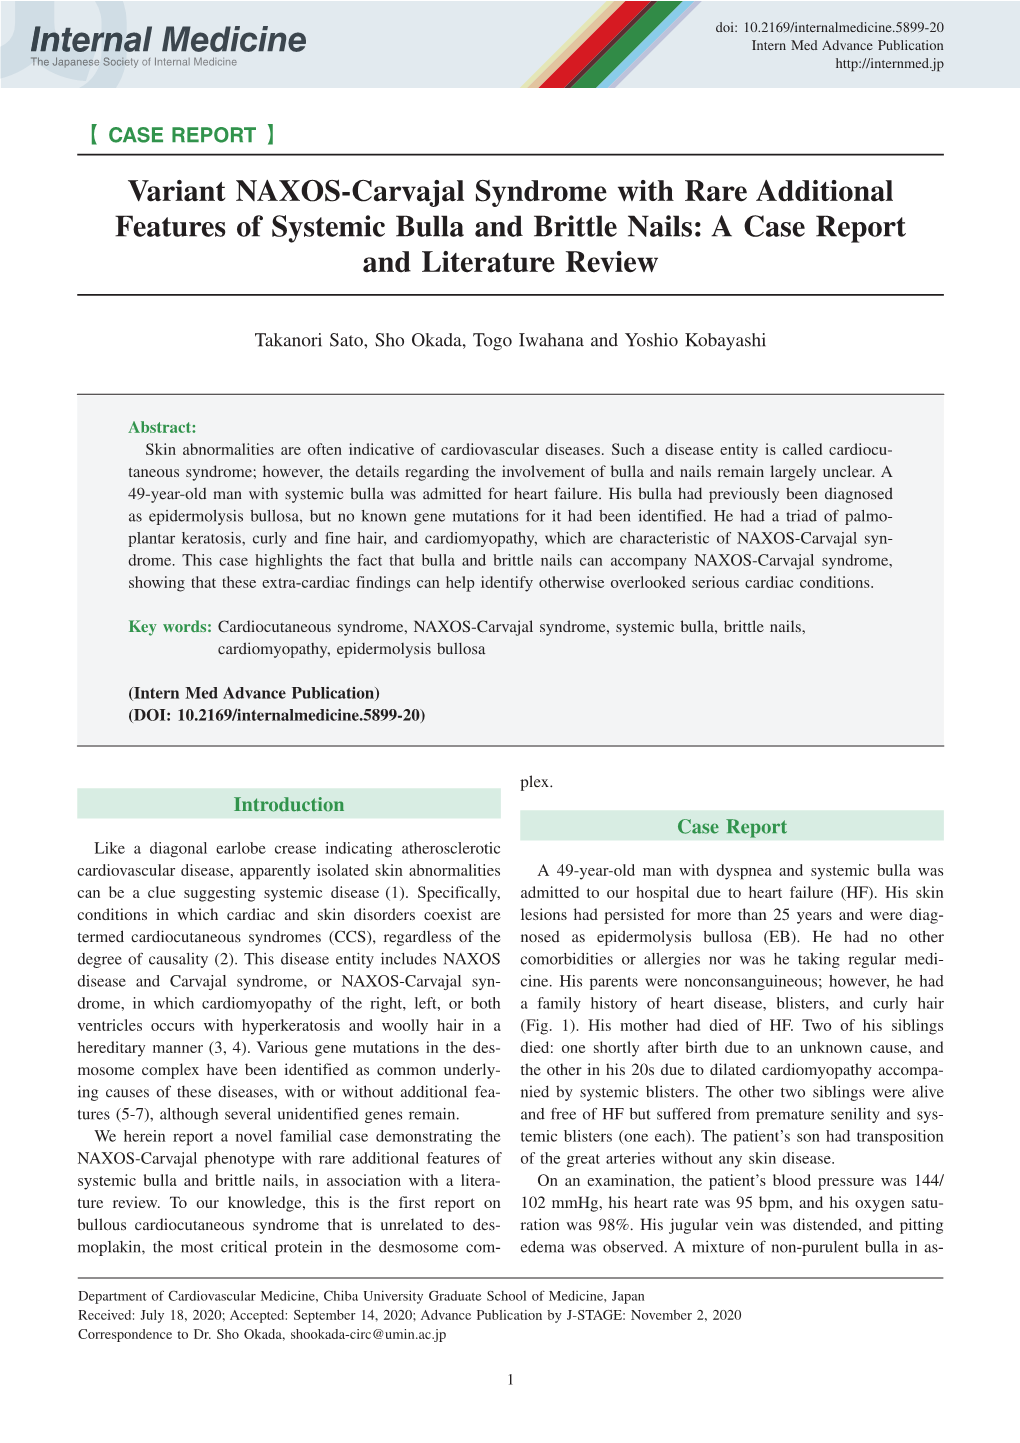 Variant NAXOS-Carvajal Syndrome with Rare Additional Features of Systemic Bulla and Brittle Nails: a Case Report and Literature Review